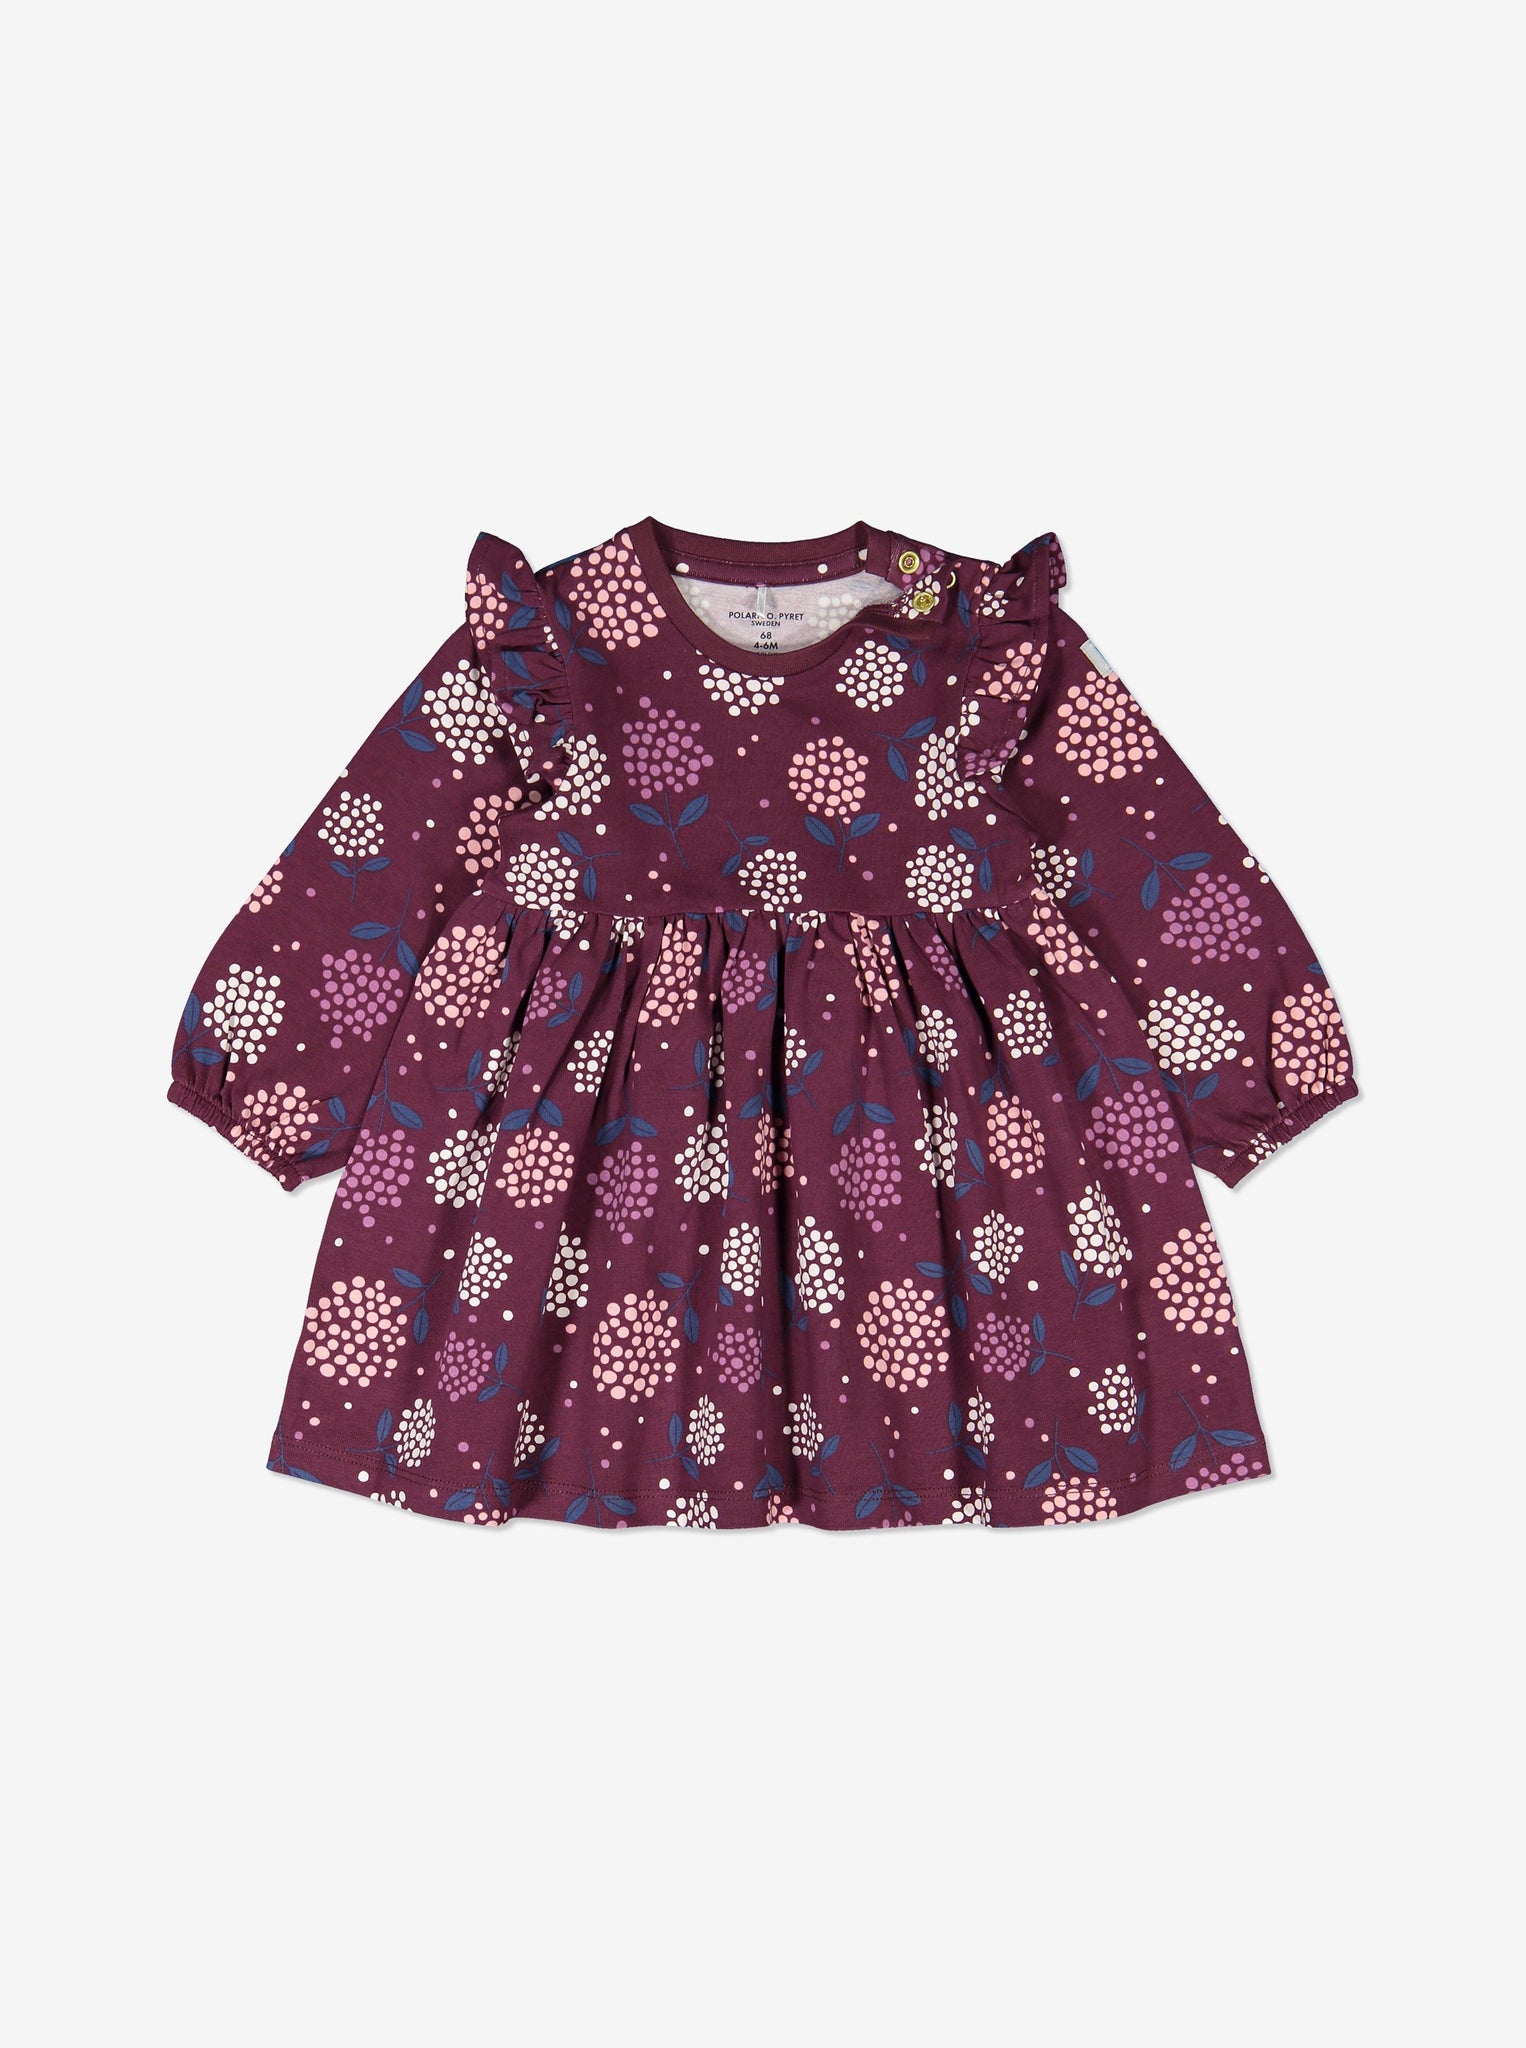 A cute purple floral long sleeve baby dress, designed with shoulder poppers